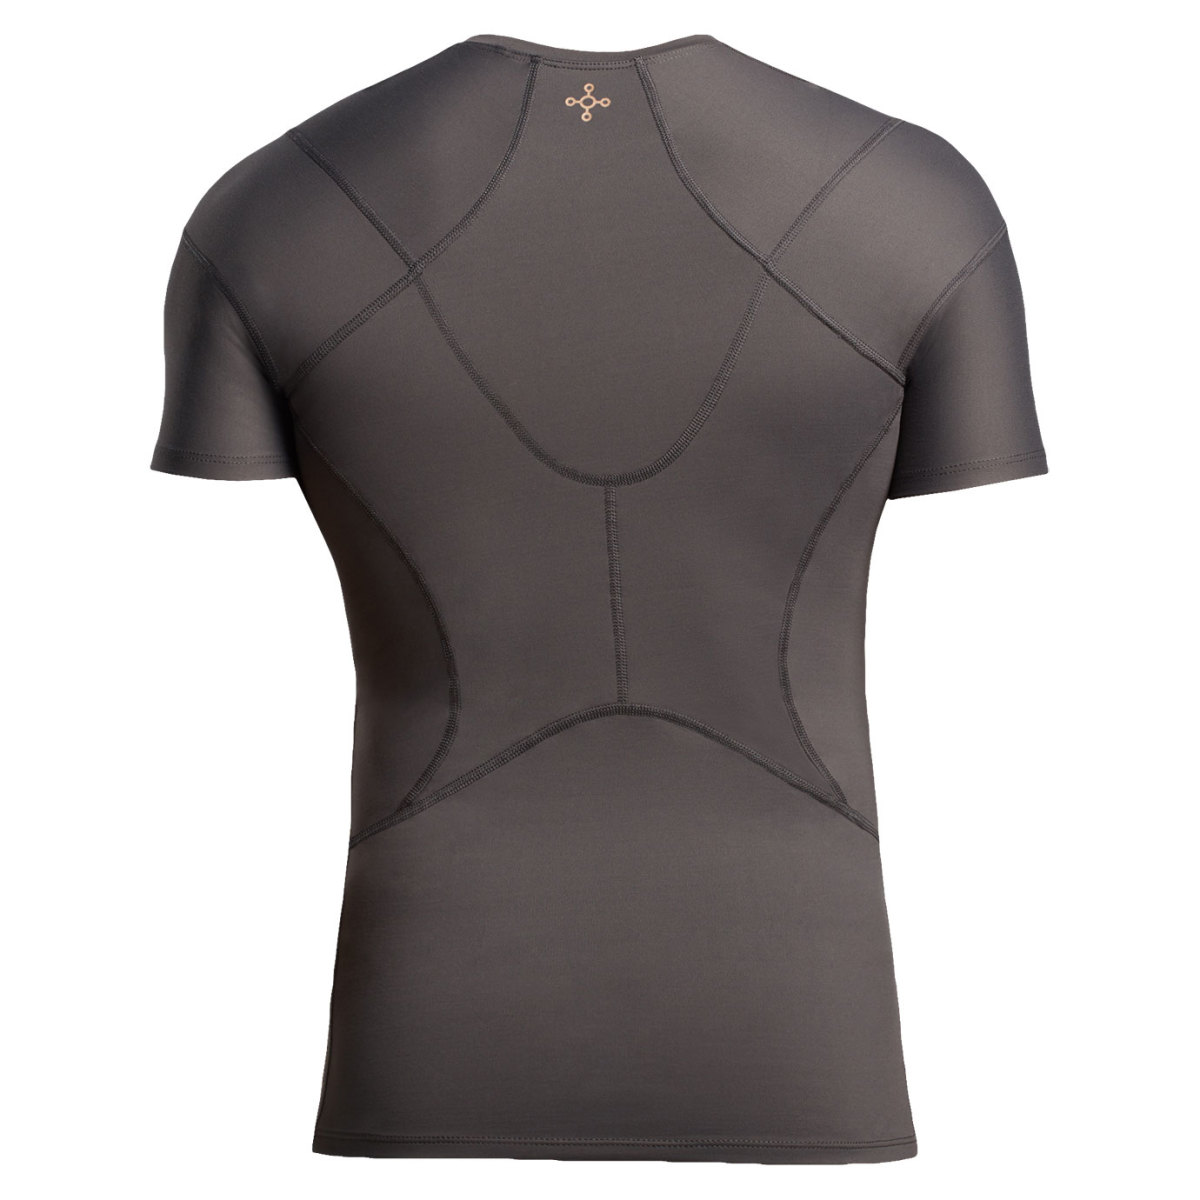 Copper Fit Back Support Shirt 2024